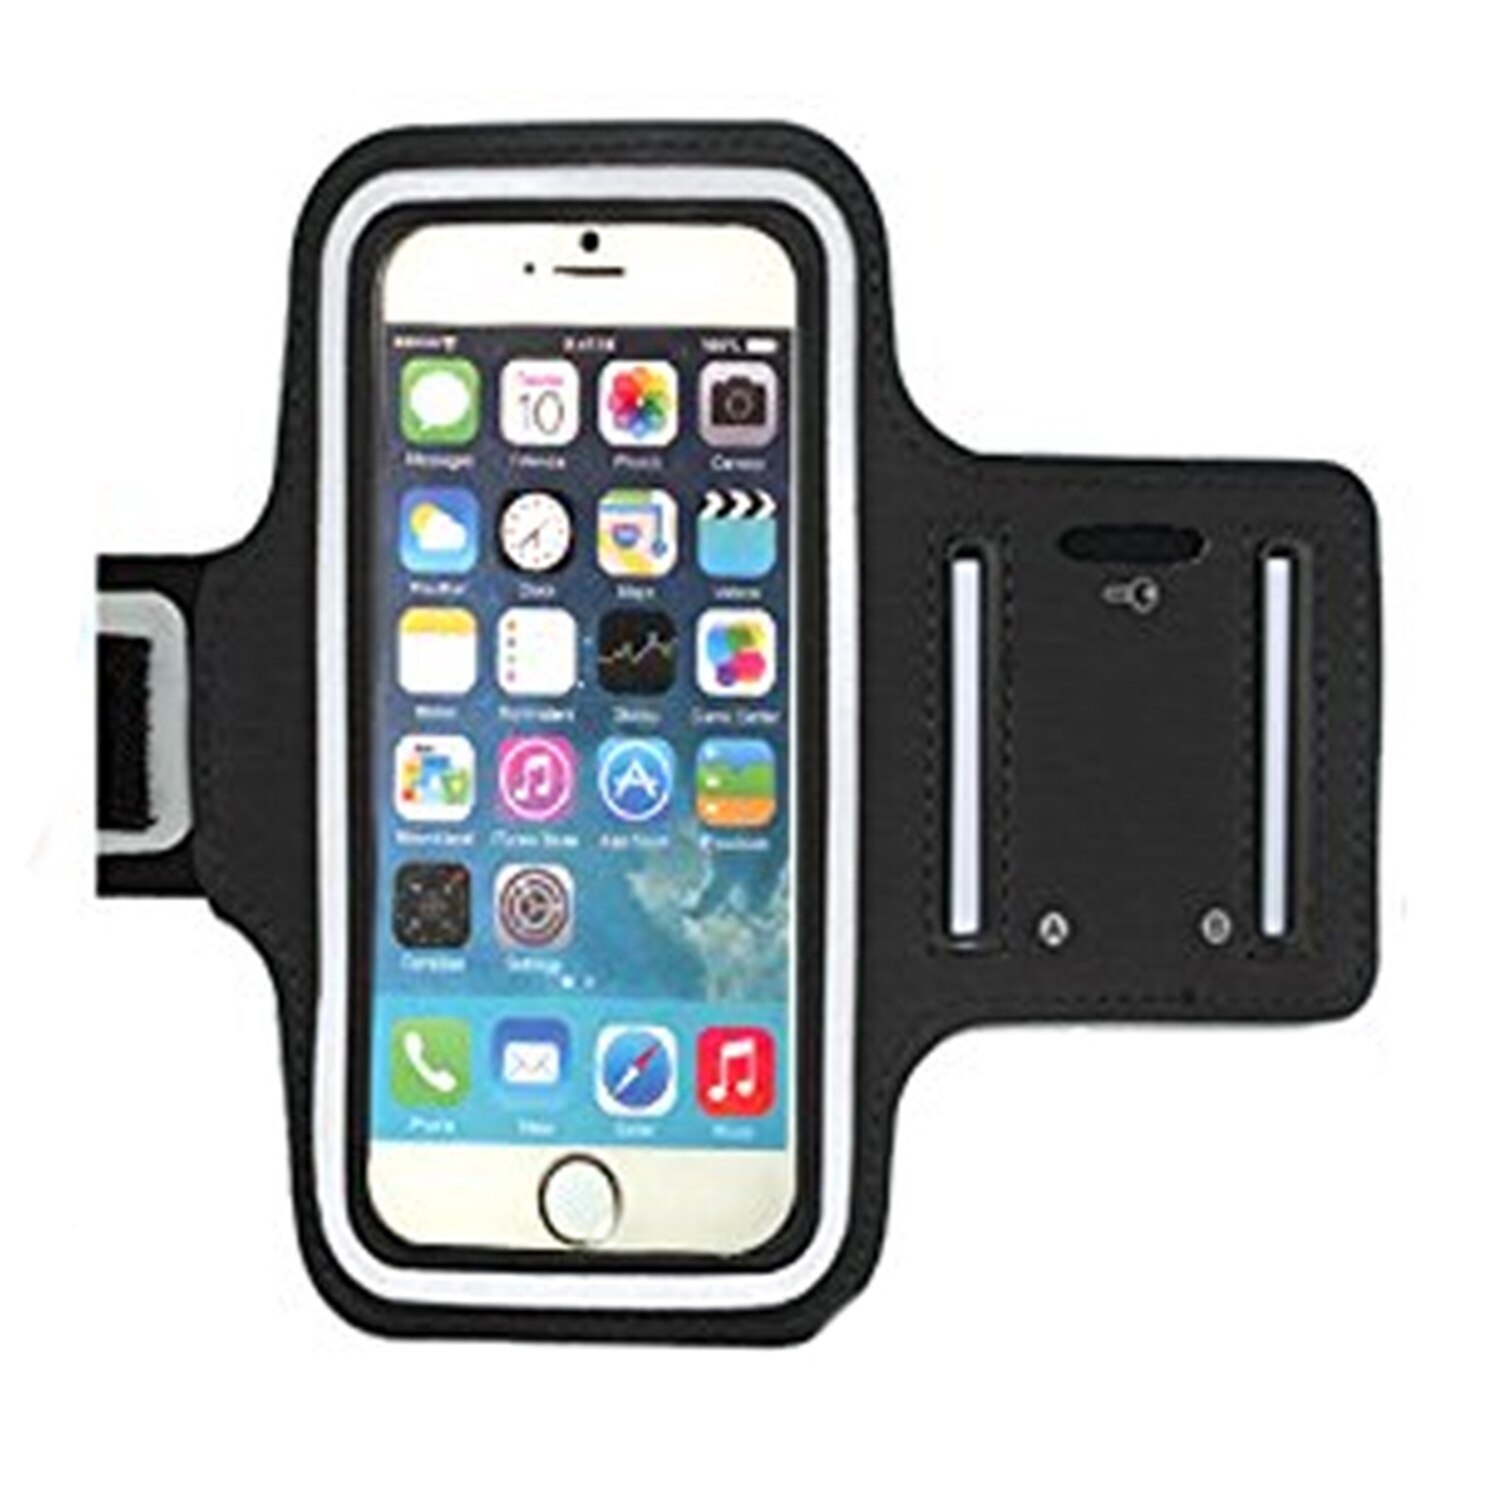 Besegad Sport fitness Brassard Carrying Armband Hand Case Houder voor Smartphone iphone 8 7 6 S 6 S iphone 6 iphone 6 s 4.7 Inch: Black